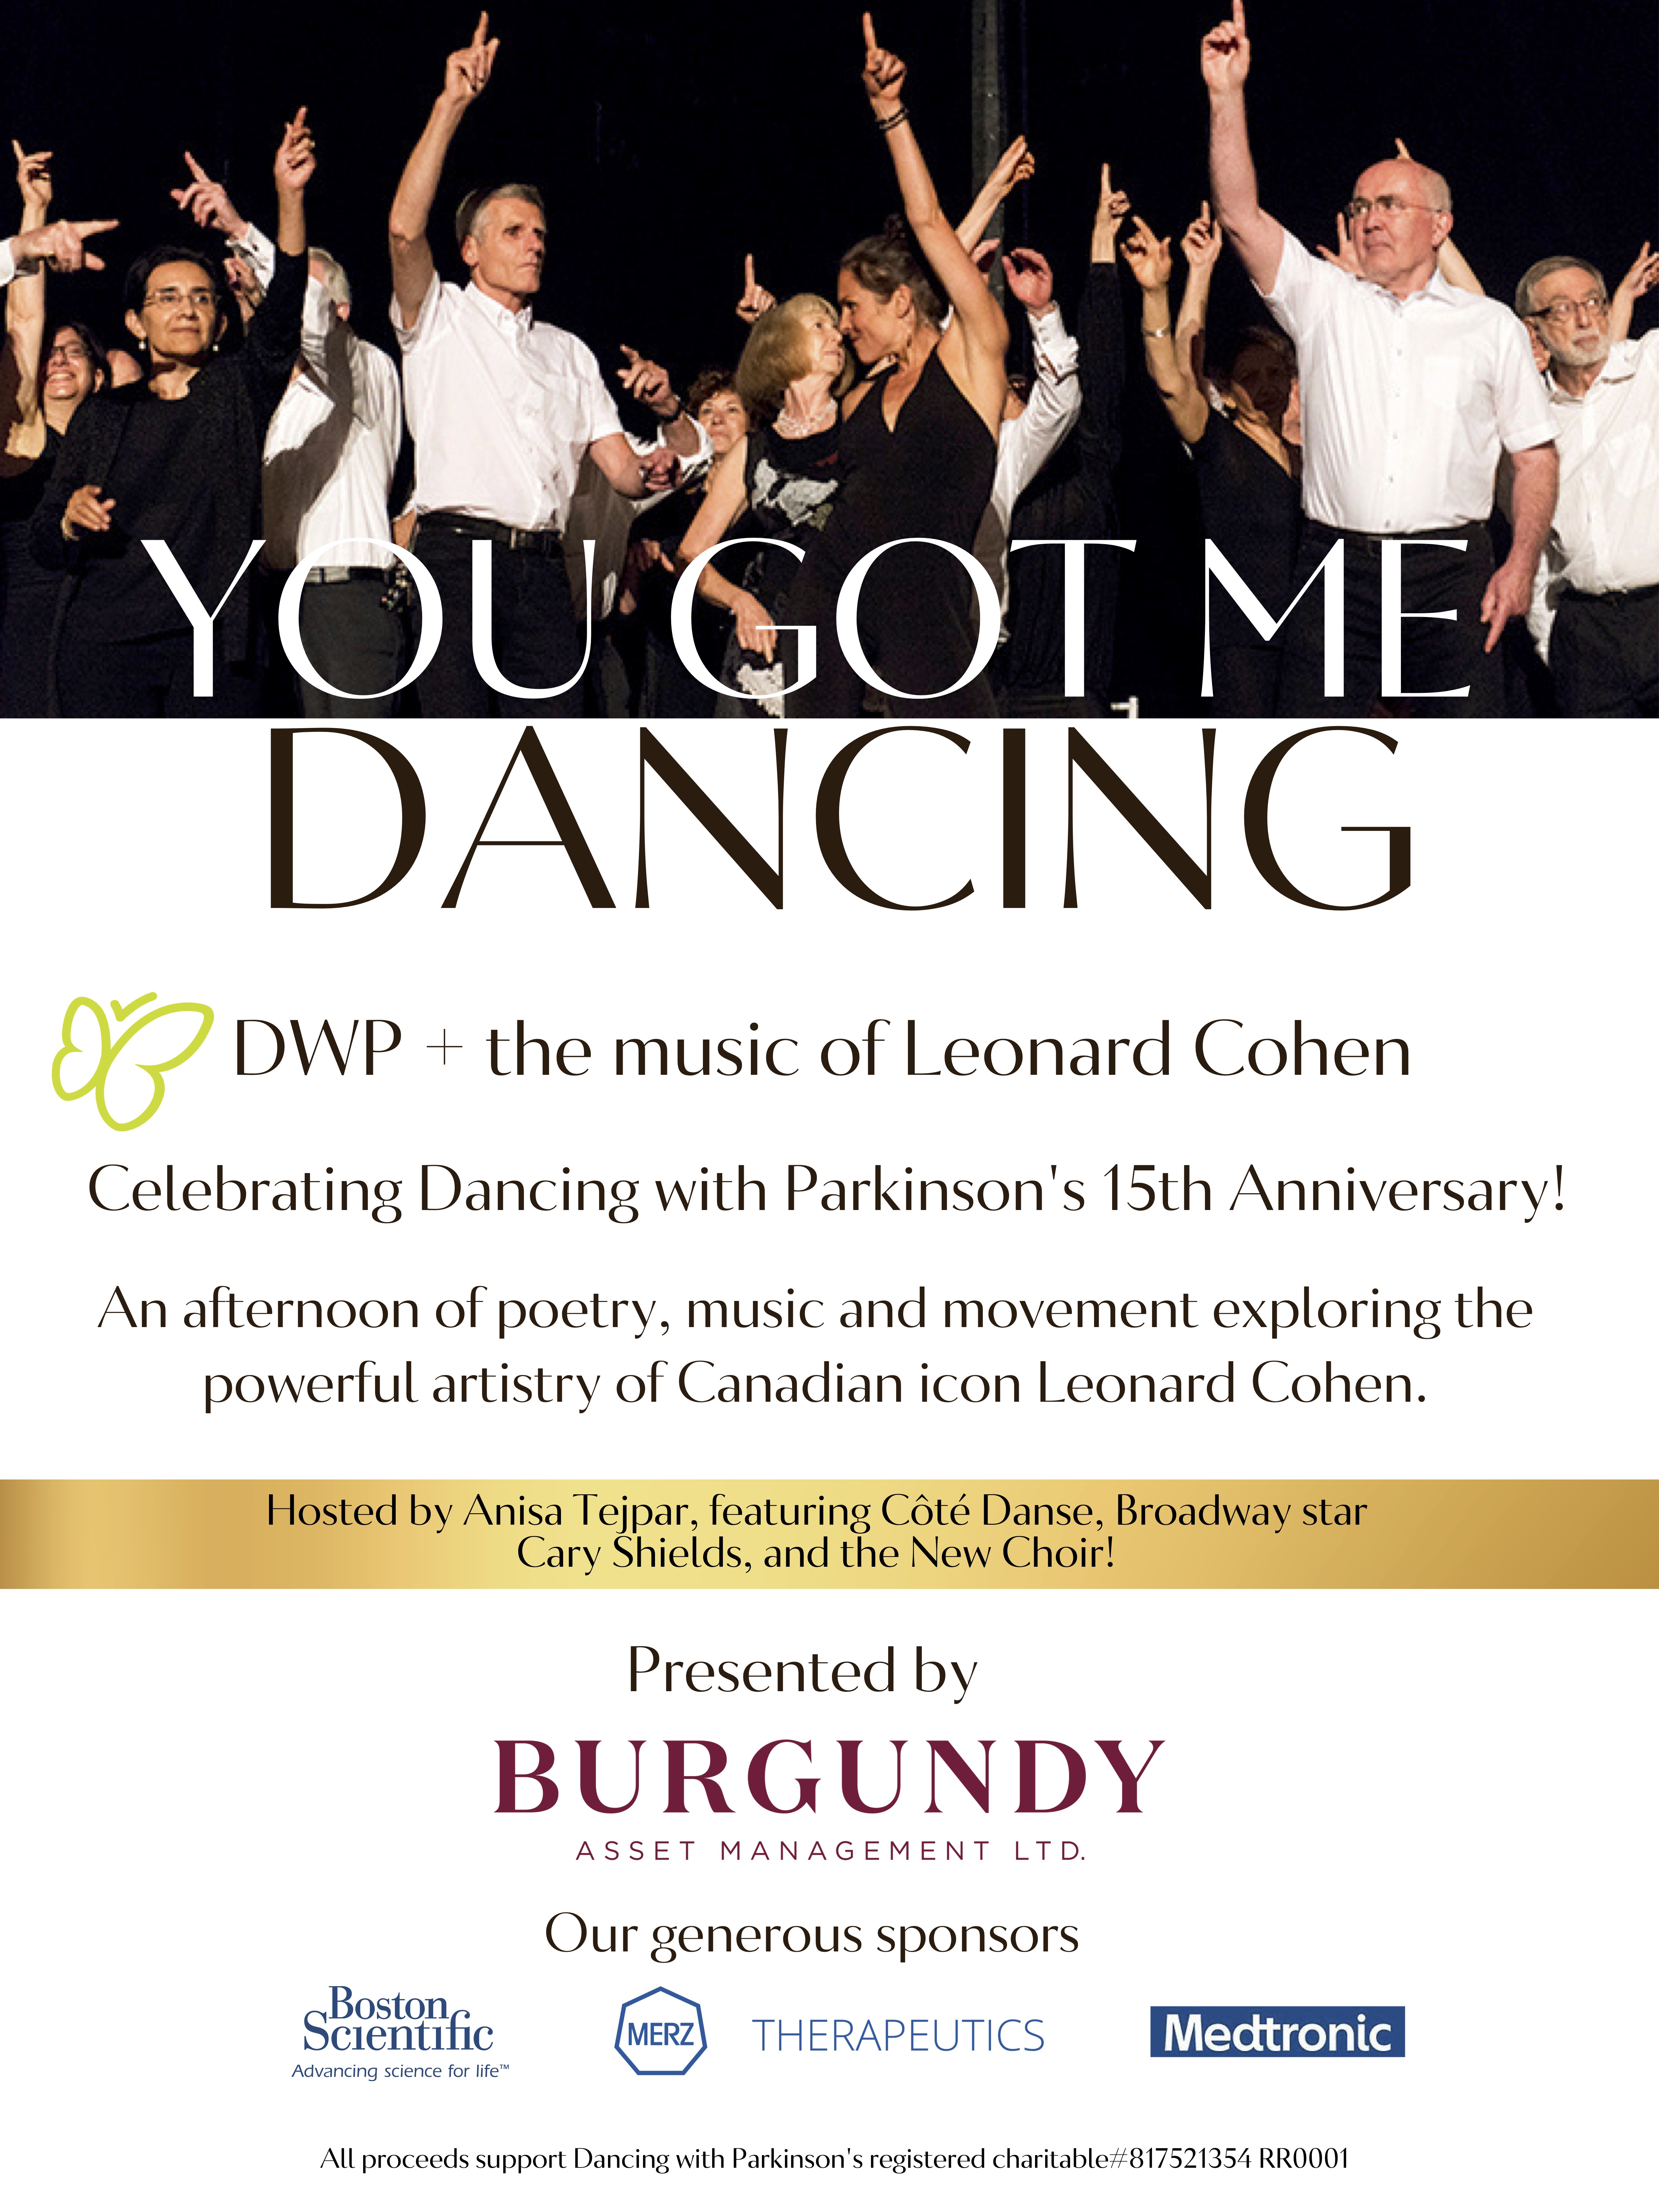 'You Got Me Dancing' poster with event details and a photo of a group of people dancing